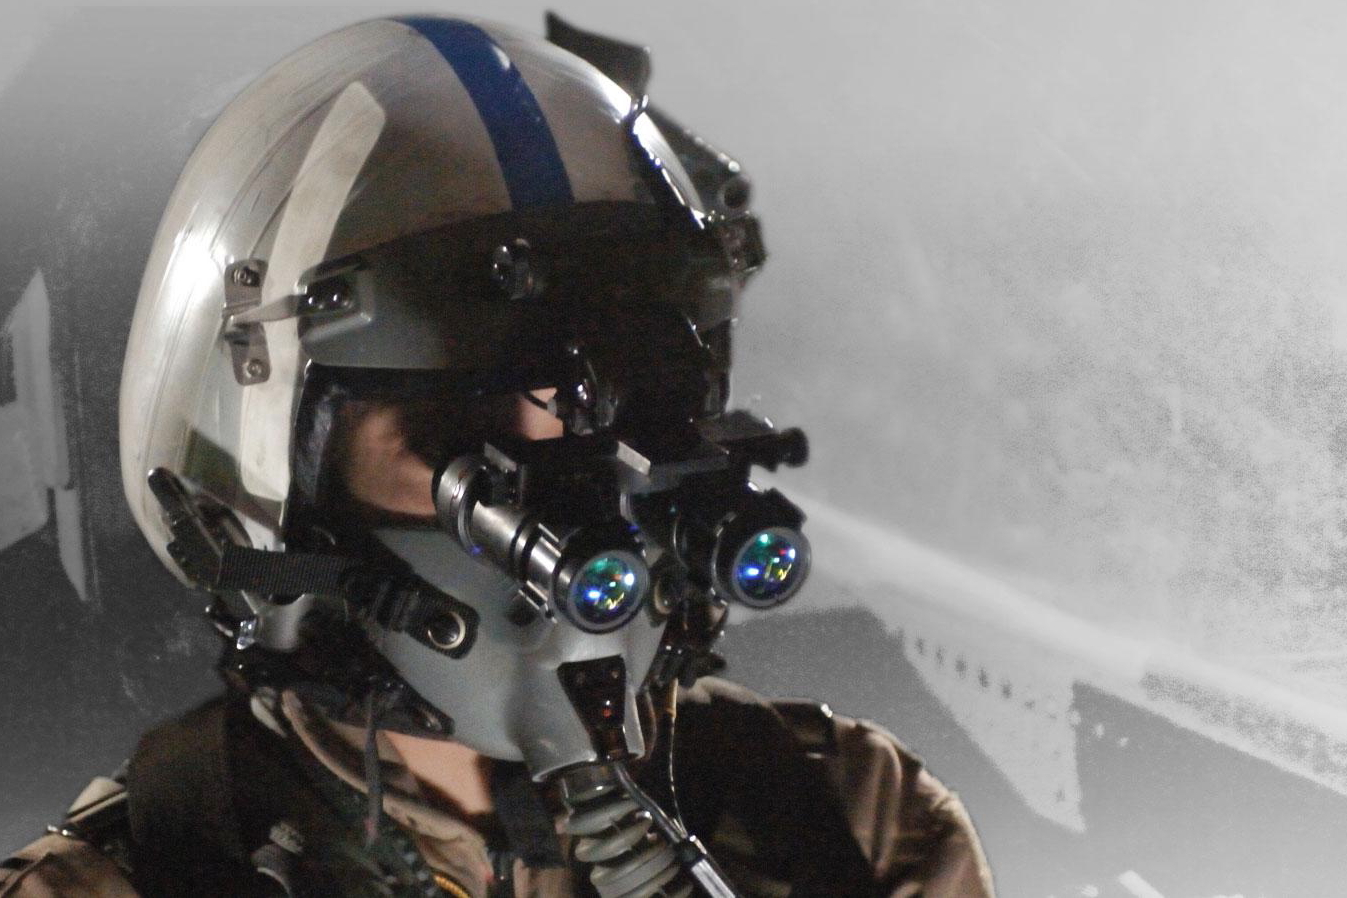 Elbit Systems of America has completed its acquisition of the Night Vision business of L3Harris Technologies for a purchase price of $350 million in cash. Click to enlarge.